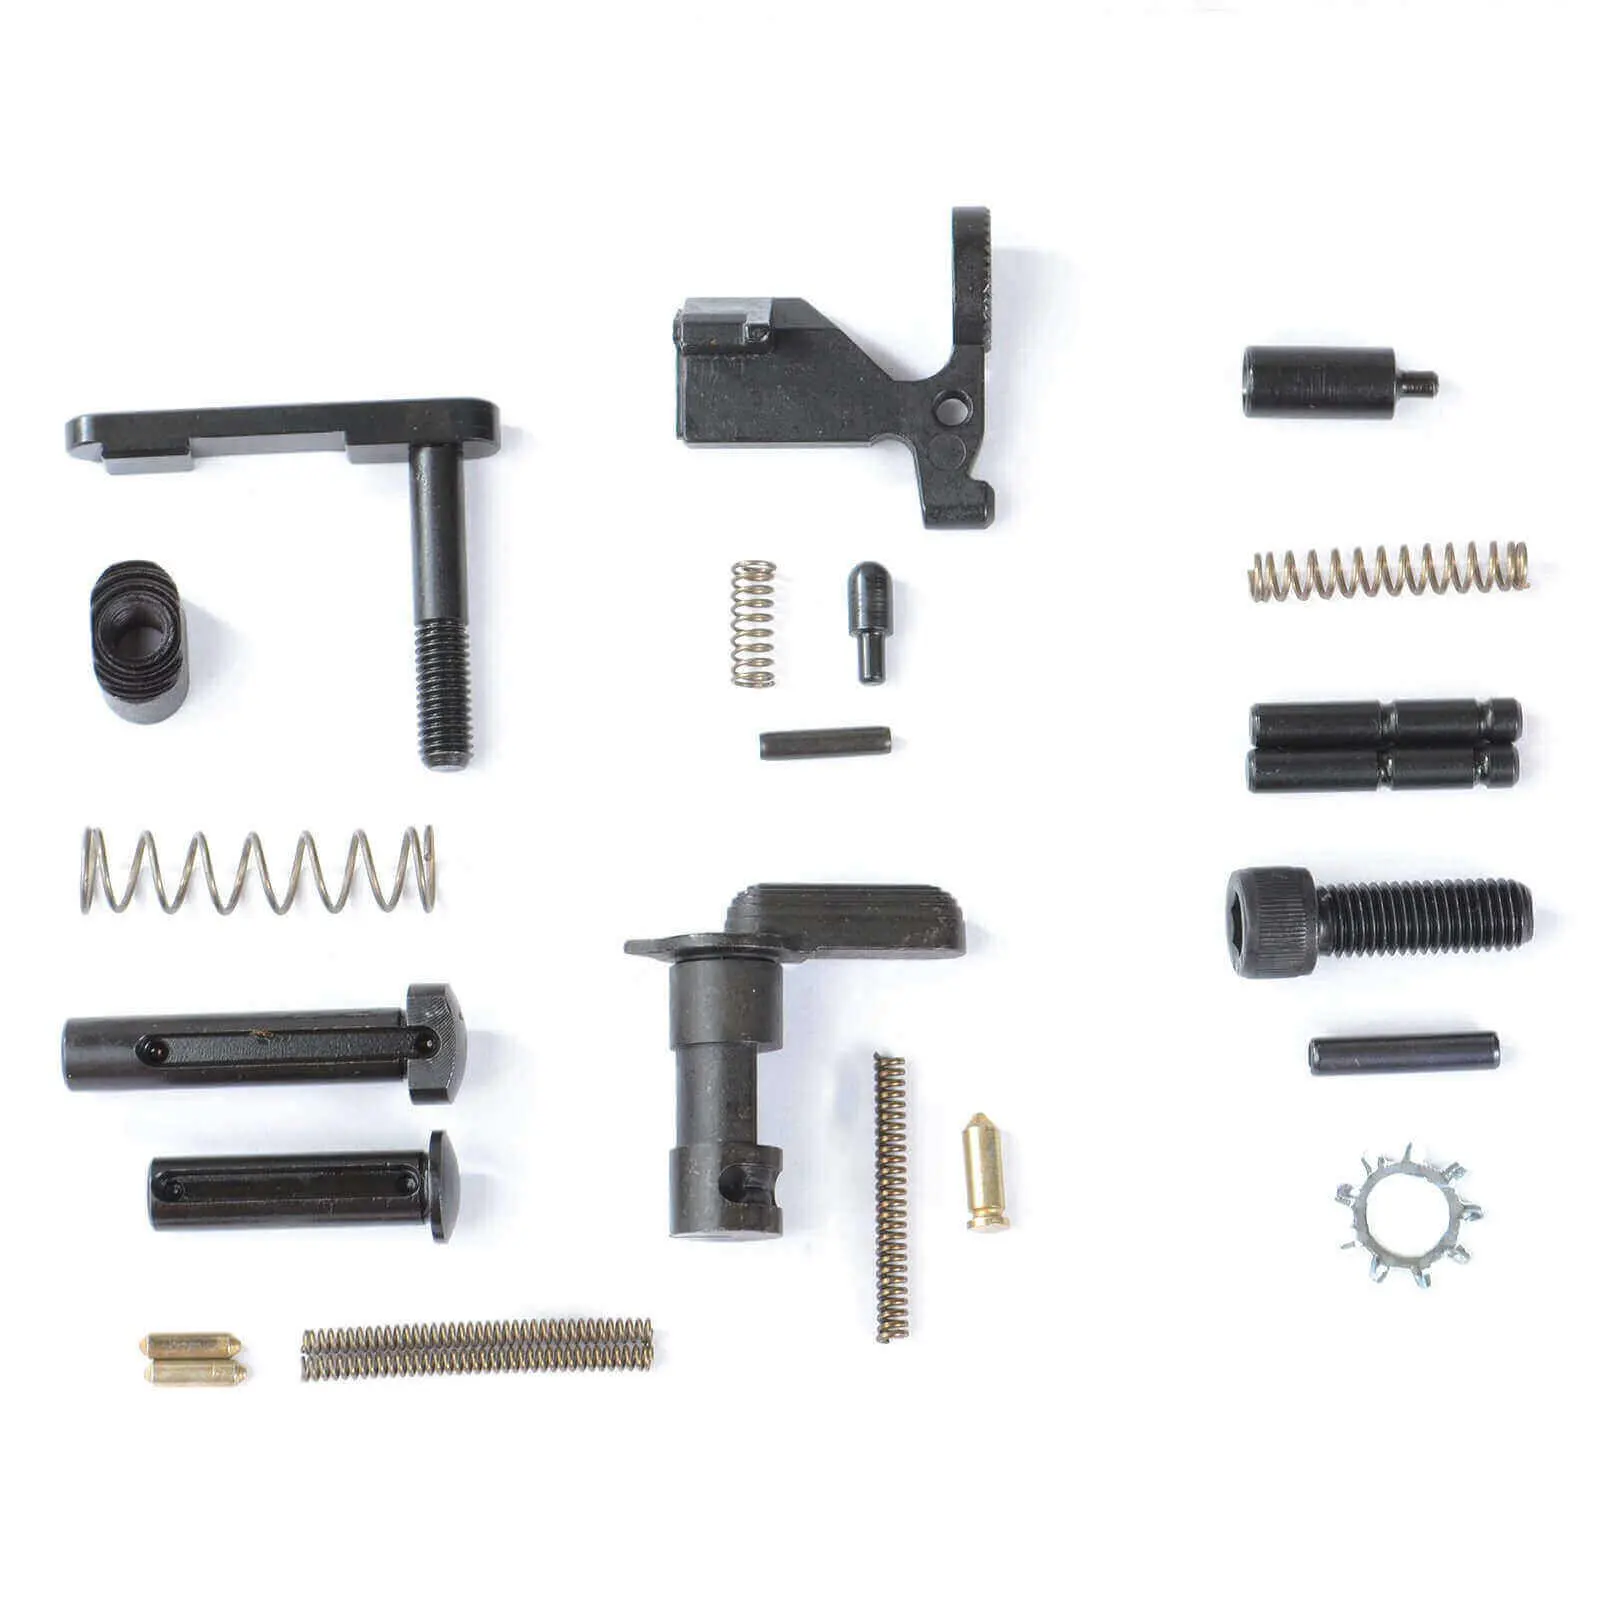 AT3™ Pro-Builder™ AR-15 Lower Parts Kit - No Grip or Trigger Assembly